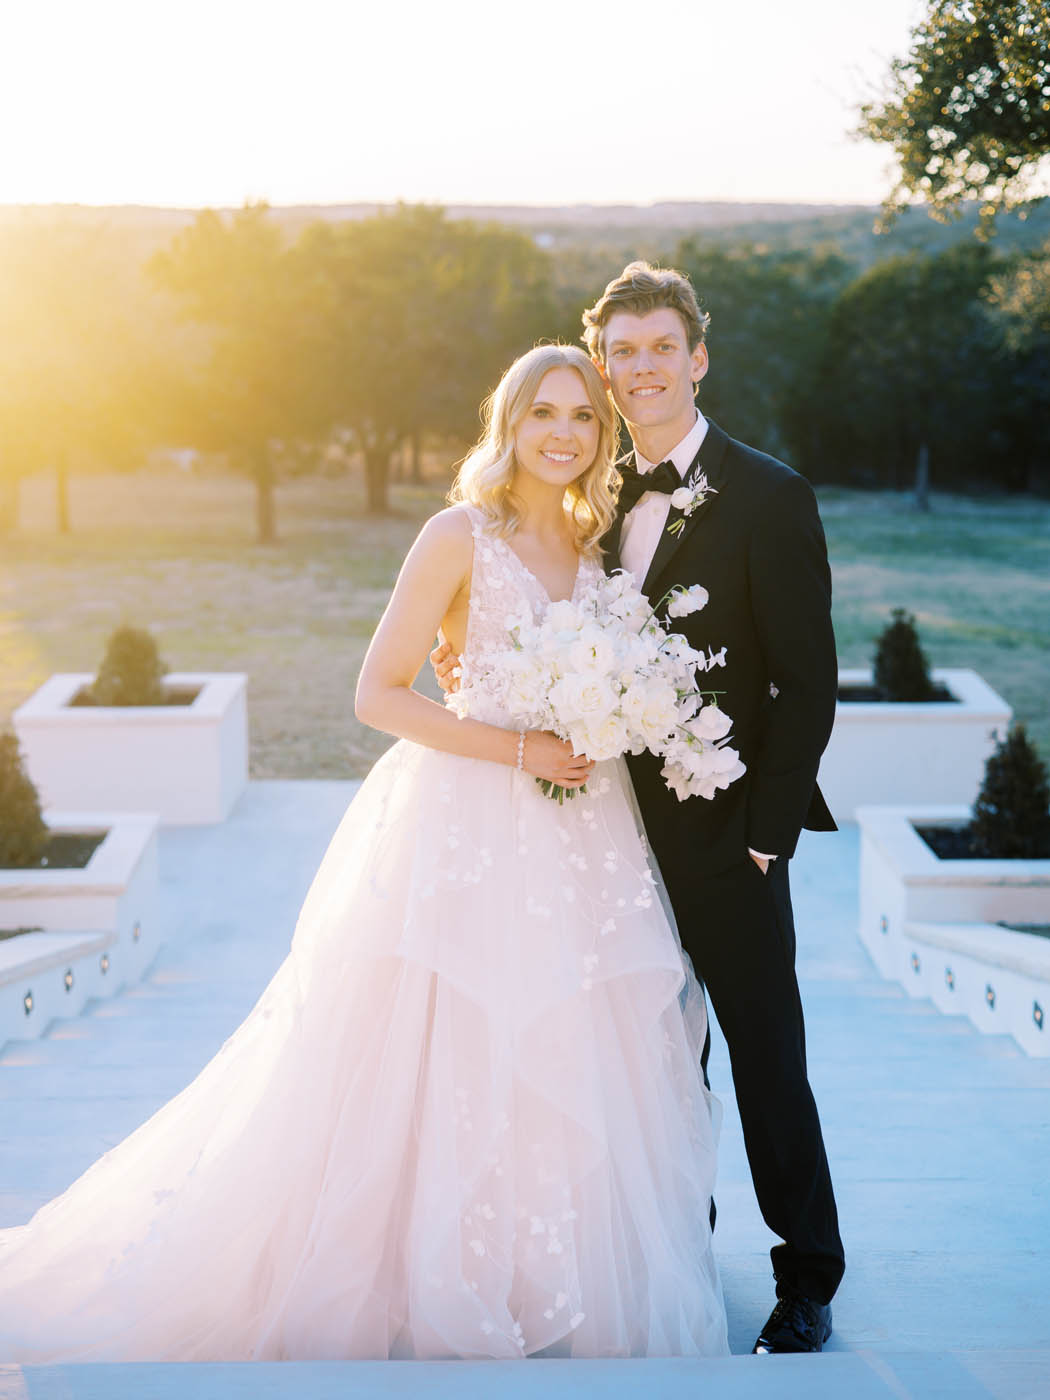 A classic sunset portrait of the newlyweds at The Arlo in Austin, Texas